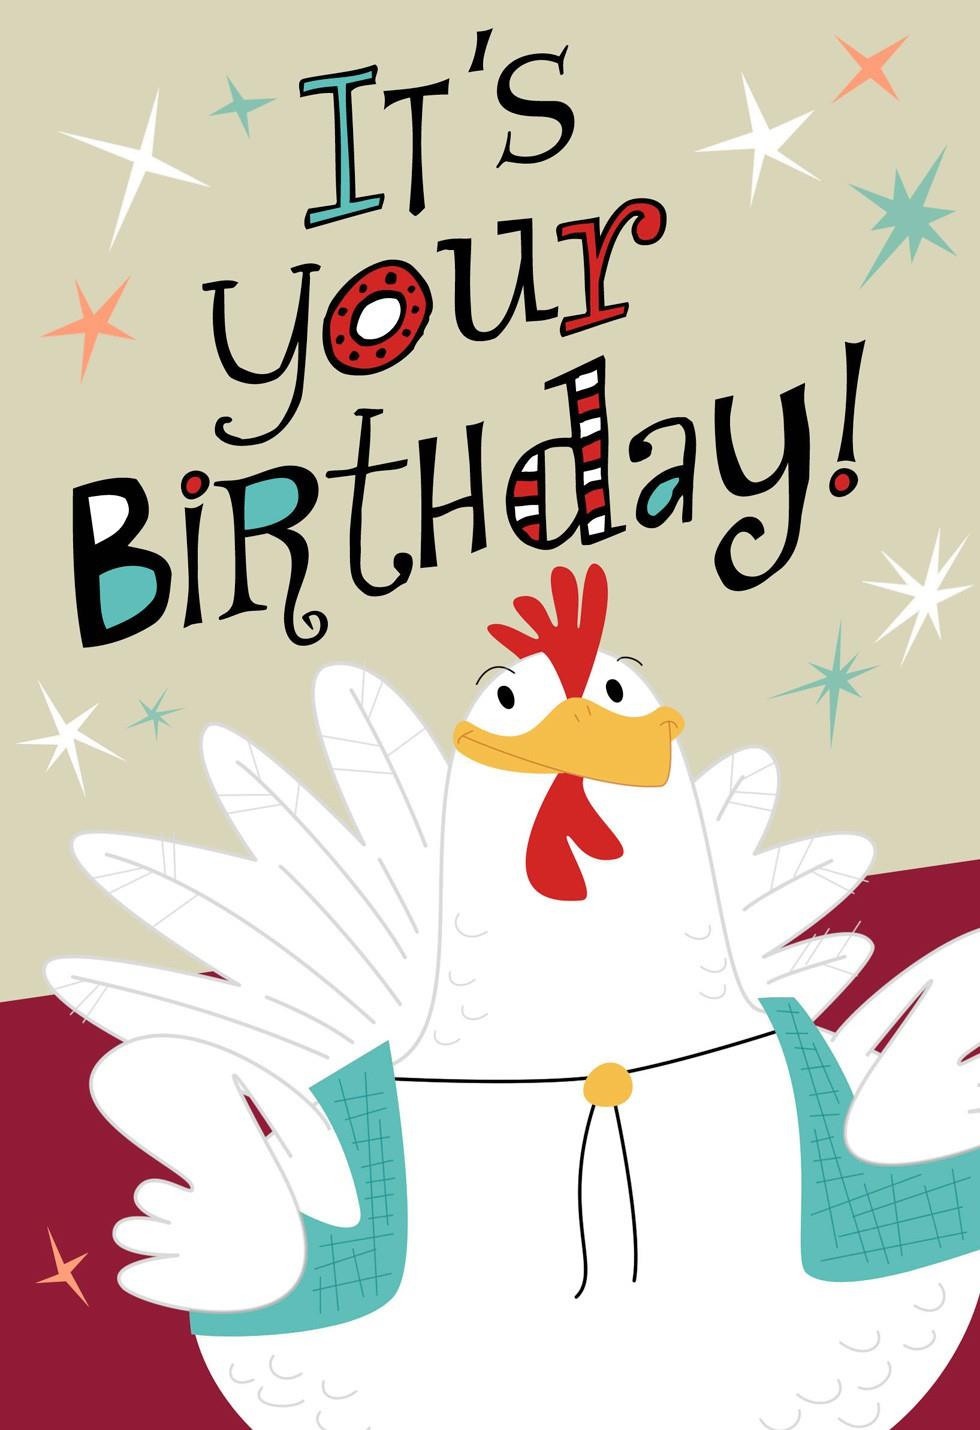 22 Of The Best Ideas For Free Printable Hallmark Birthday Cards Home 